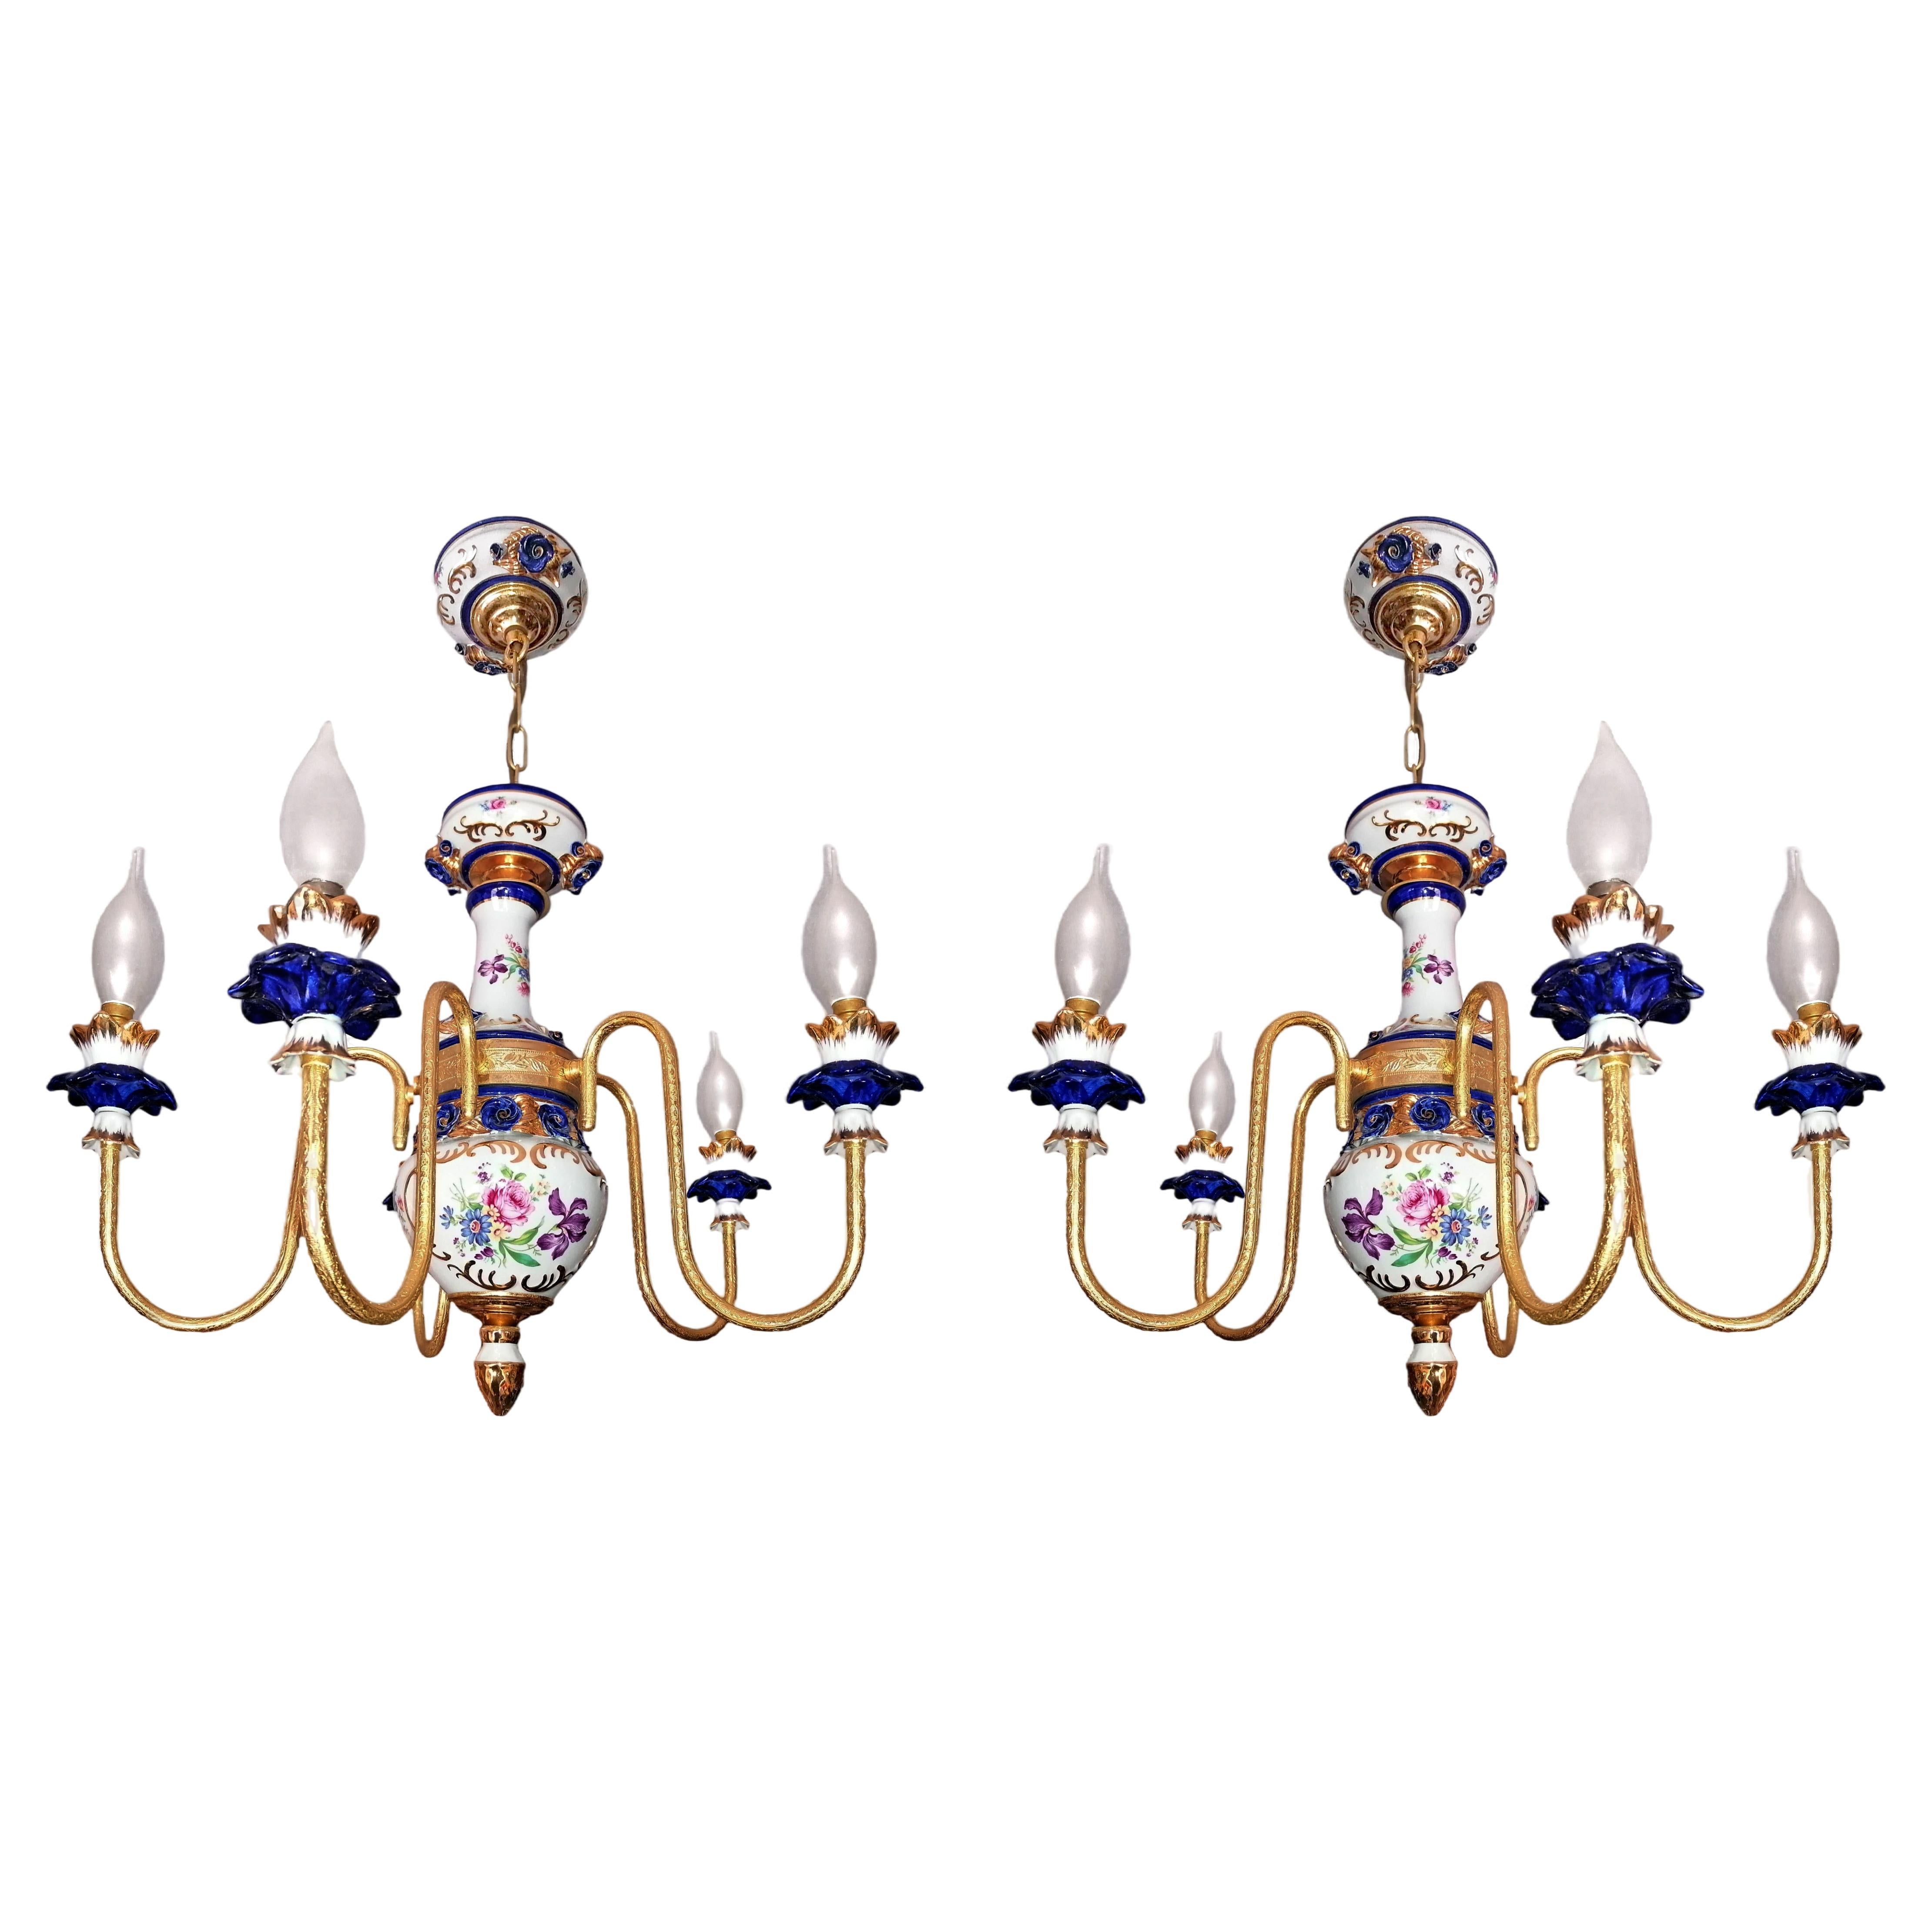 Gorgeous Pair of French Limoges Style Gilt Chandelier in Pink & Blue Porcelain